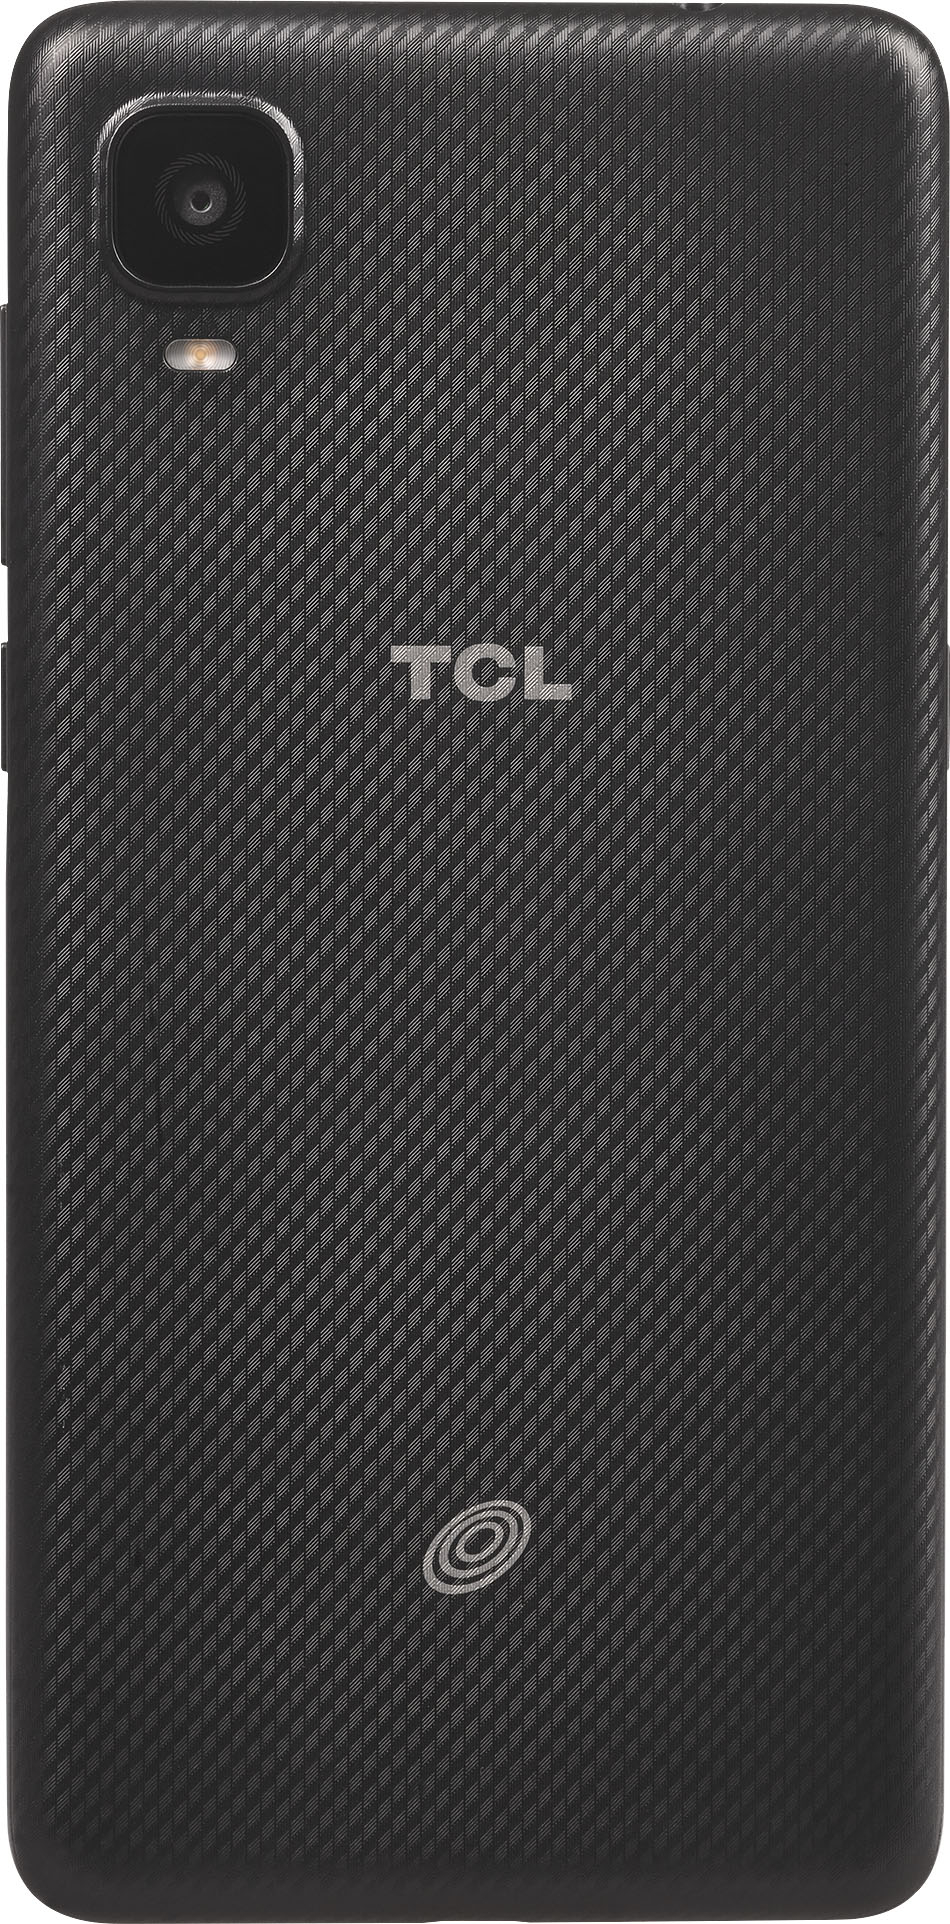 Back View: Simple Mobile - TCL A3, 32GB Prime Black - Prepaid Smartphone